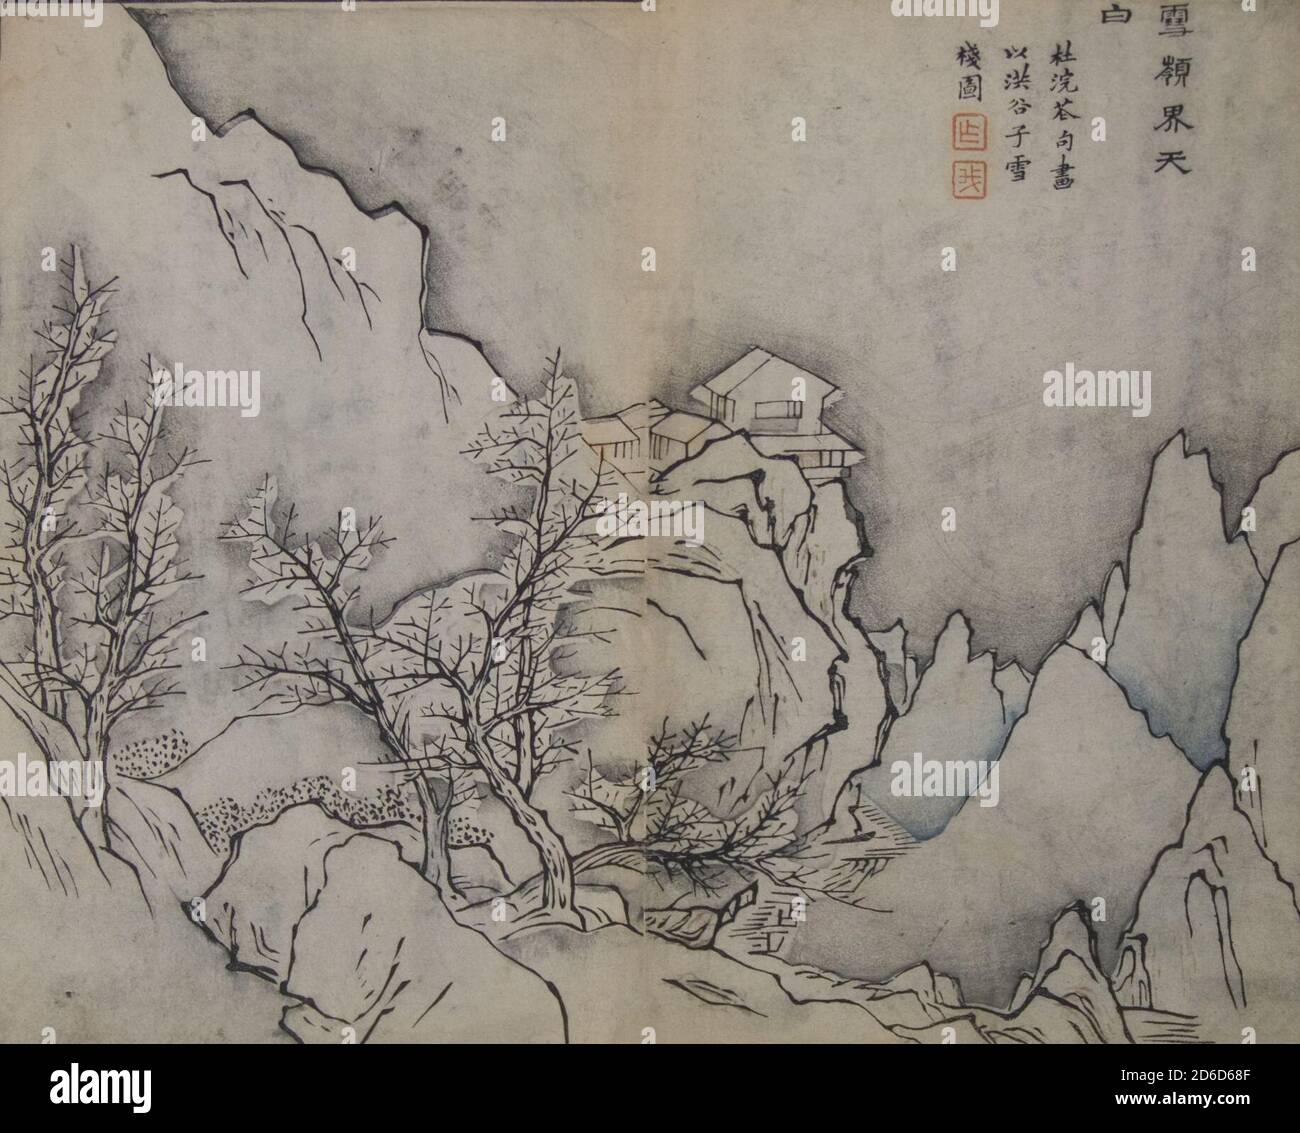 Snowy Peaks Touching the Heavens, in the manner of Snow-covered Inn by Jing Hao (active ca. 870-ca. 930), from the Mustard Seed Garden Manual of Painting, First edition, 1679. Stock Photo